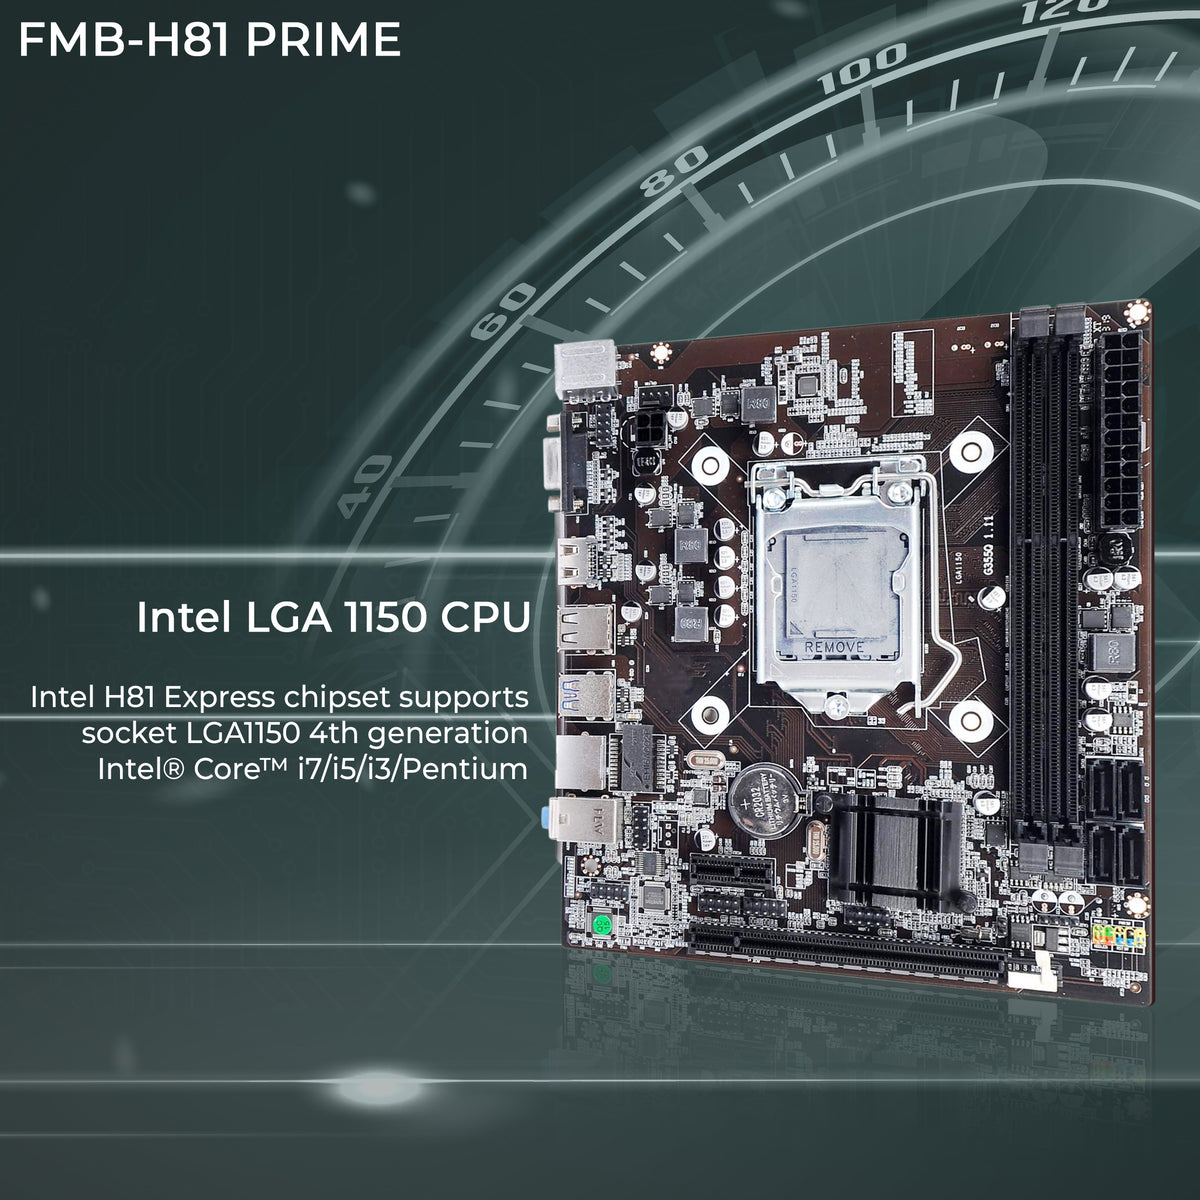 Foxin FMB-H81 PRIME Motherboard - LGA 1150 Socket with H81 Chipset | Dual Channel DDR3 Max Memory Upto 16GB (8 GB x 2) RAM | NVME NGFF Port